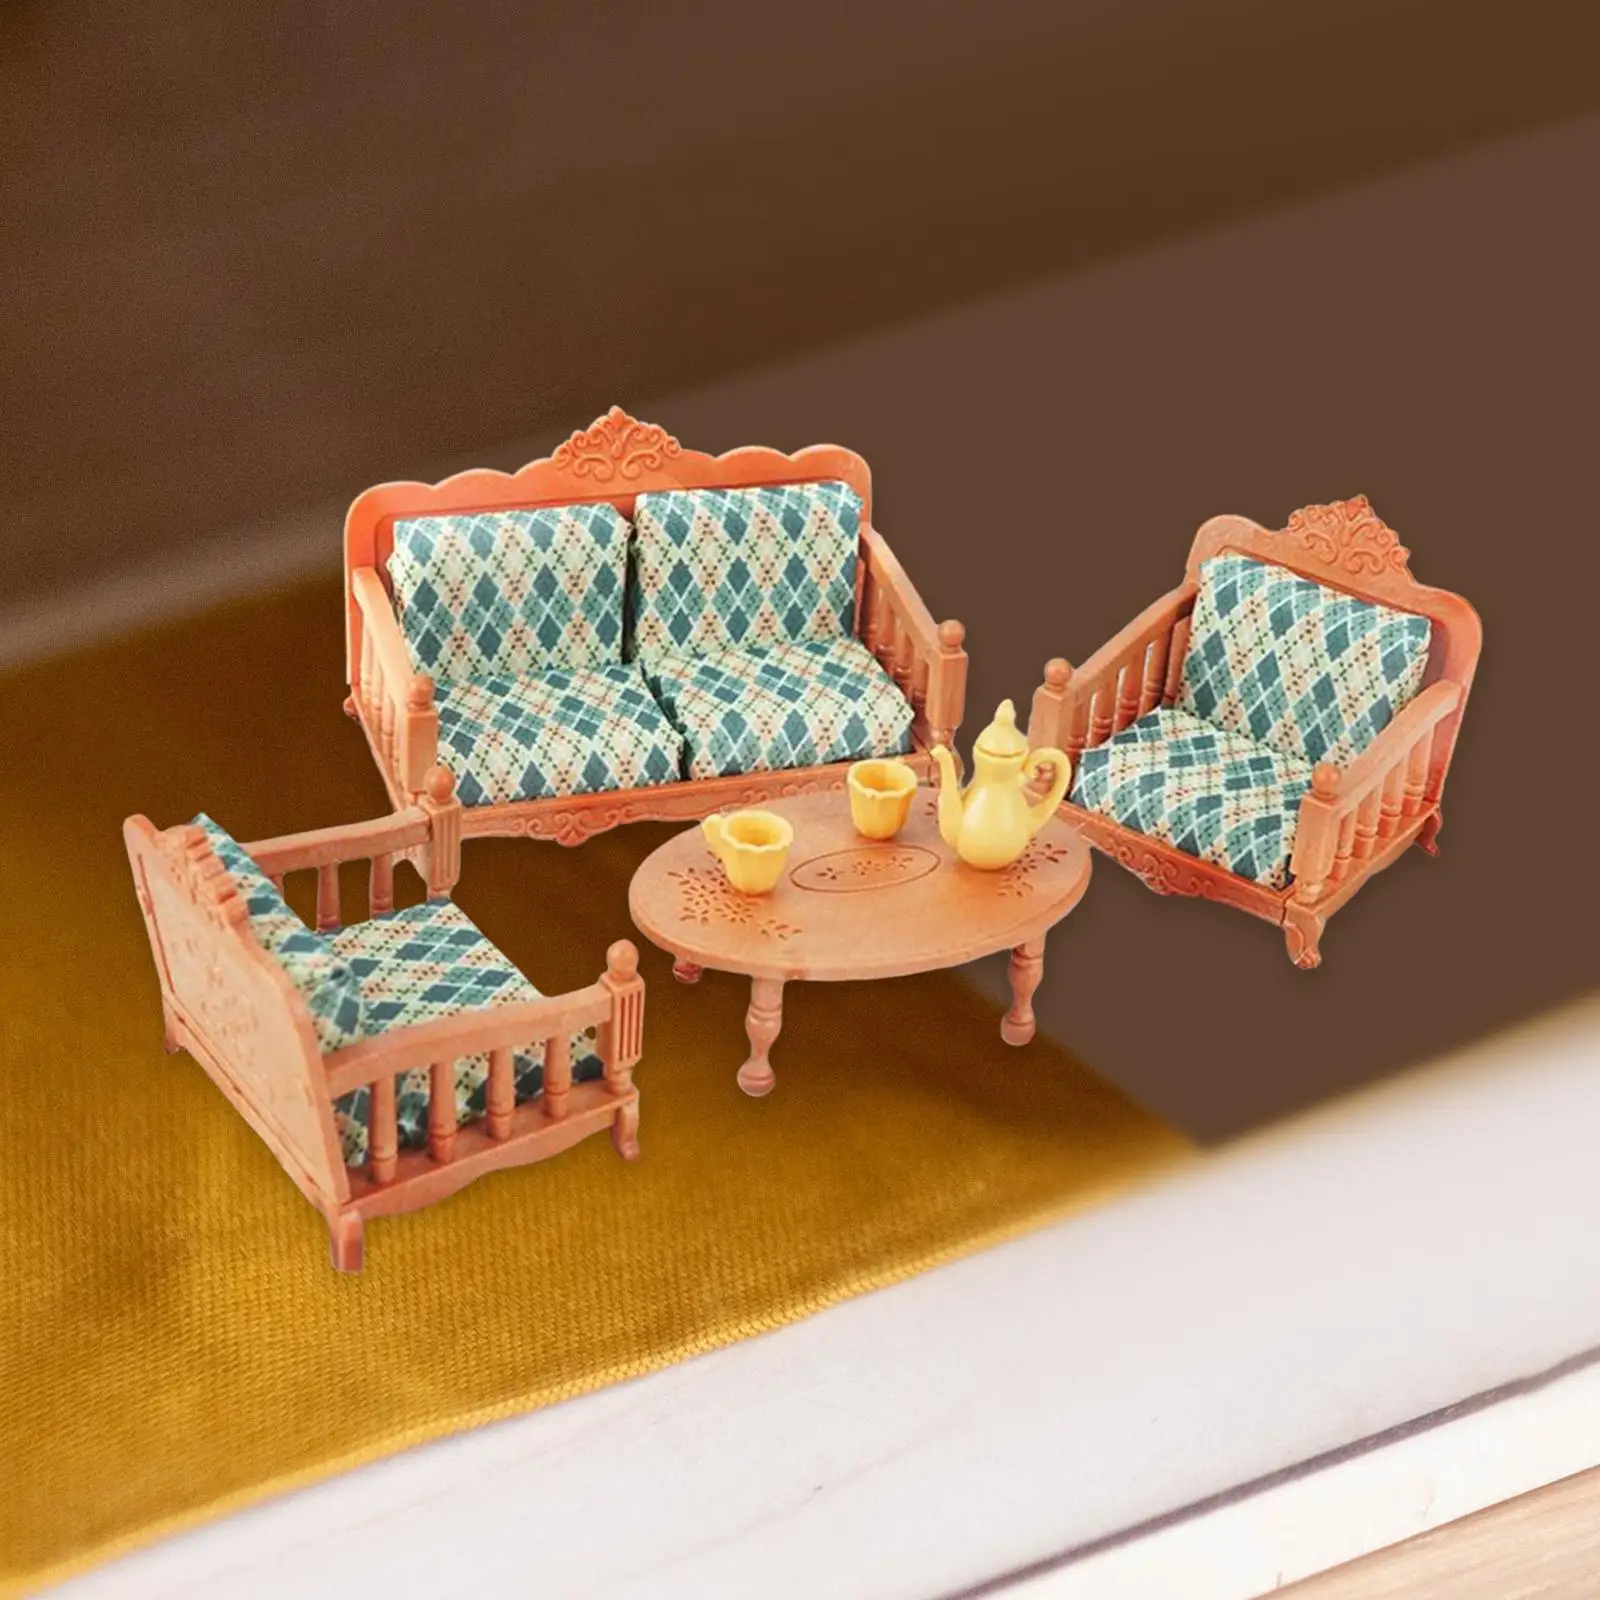 Dining Table with Chairs 1:12 Scale Wooden Doll House Furniture toy for Dolls House